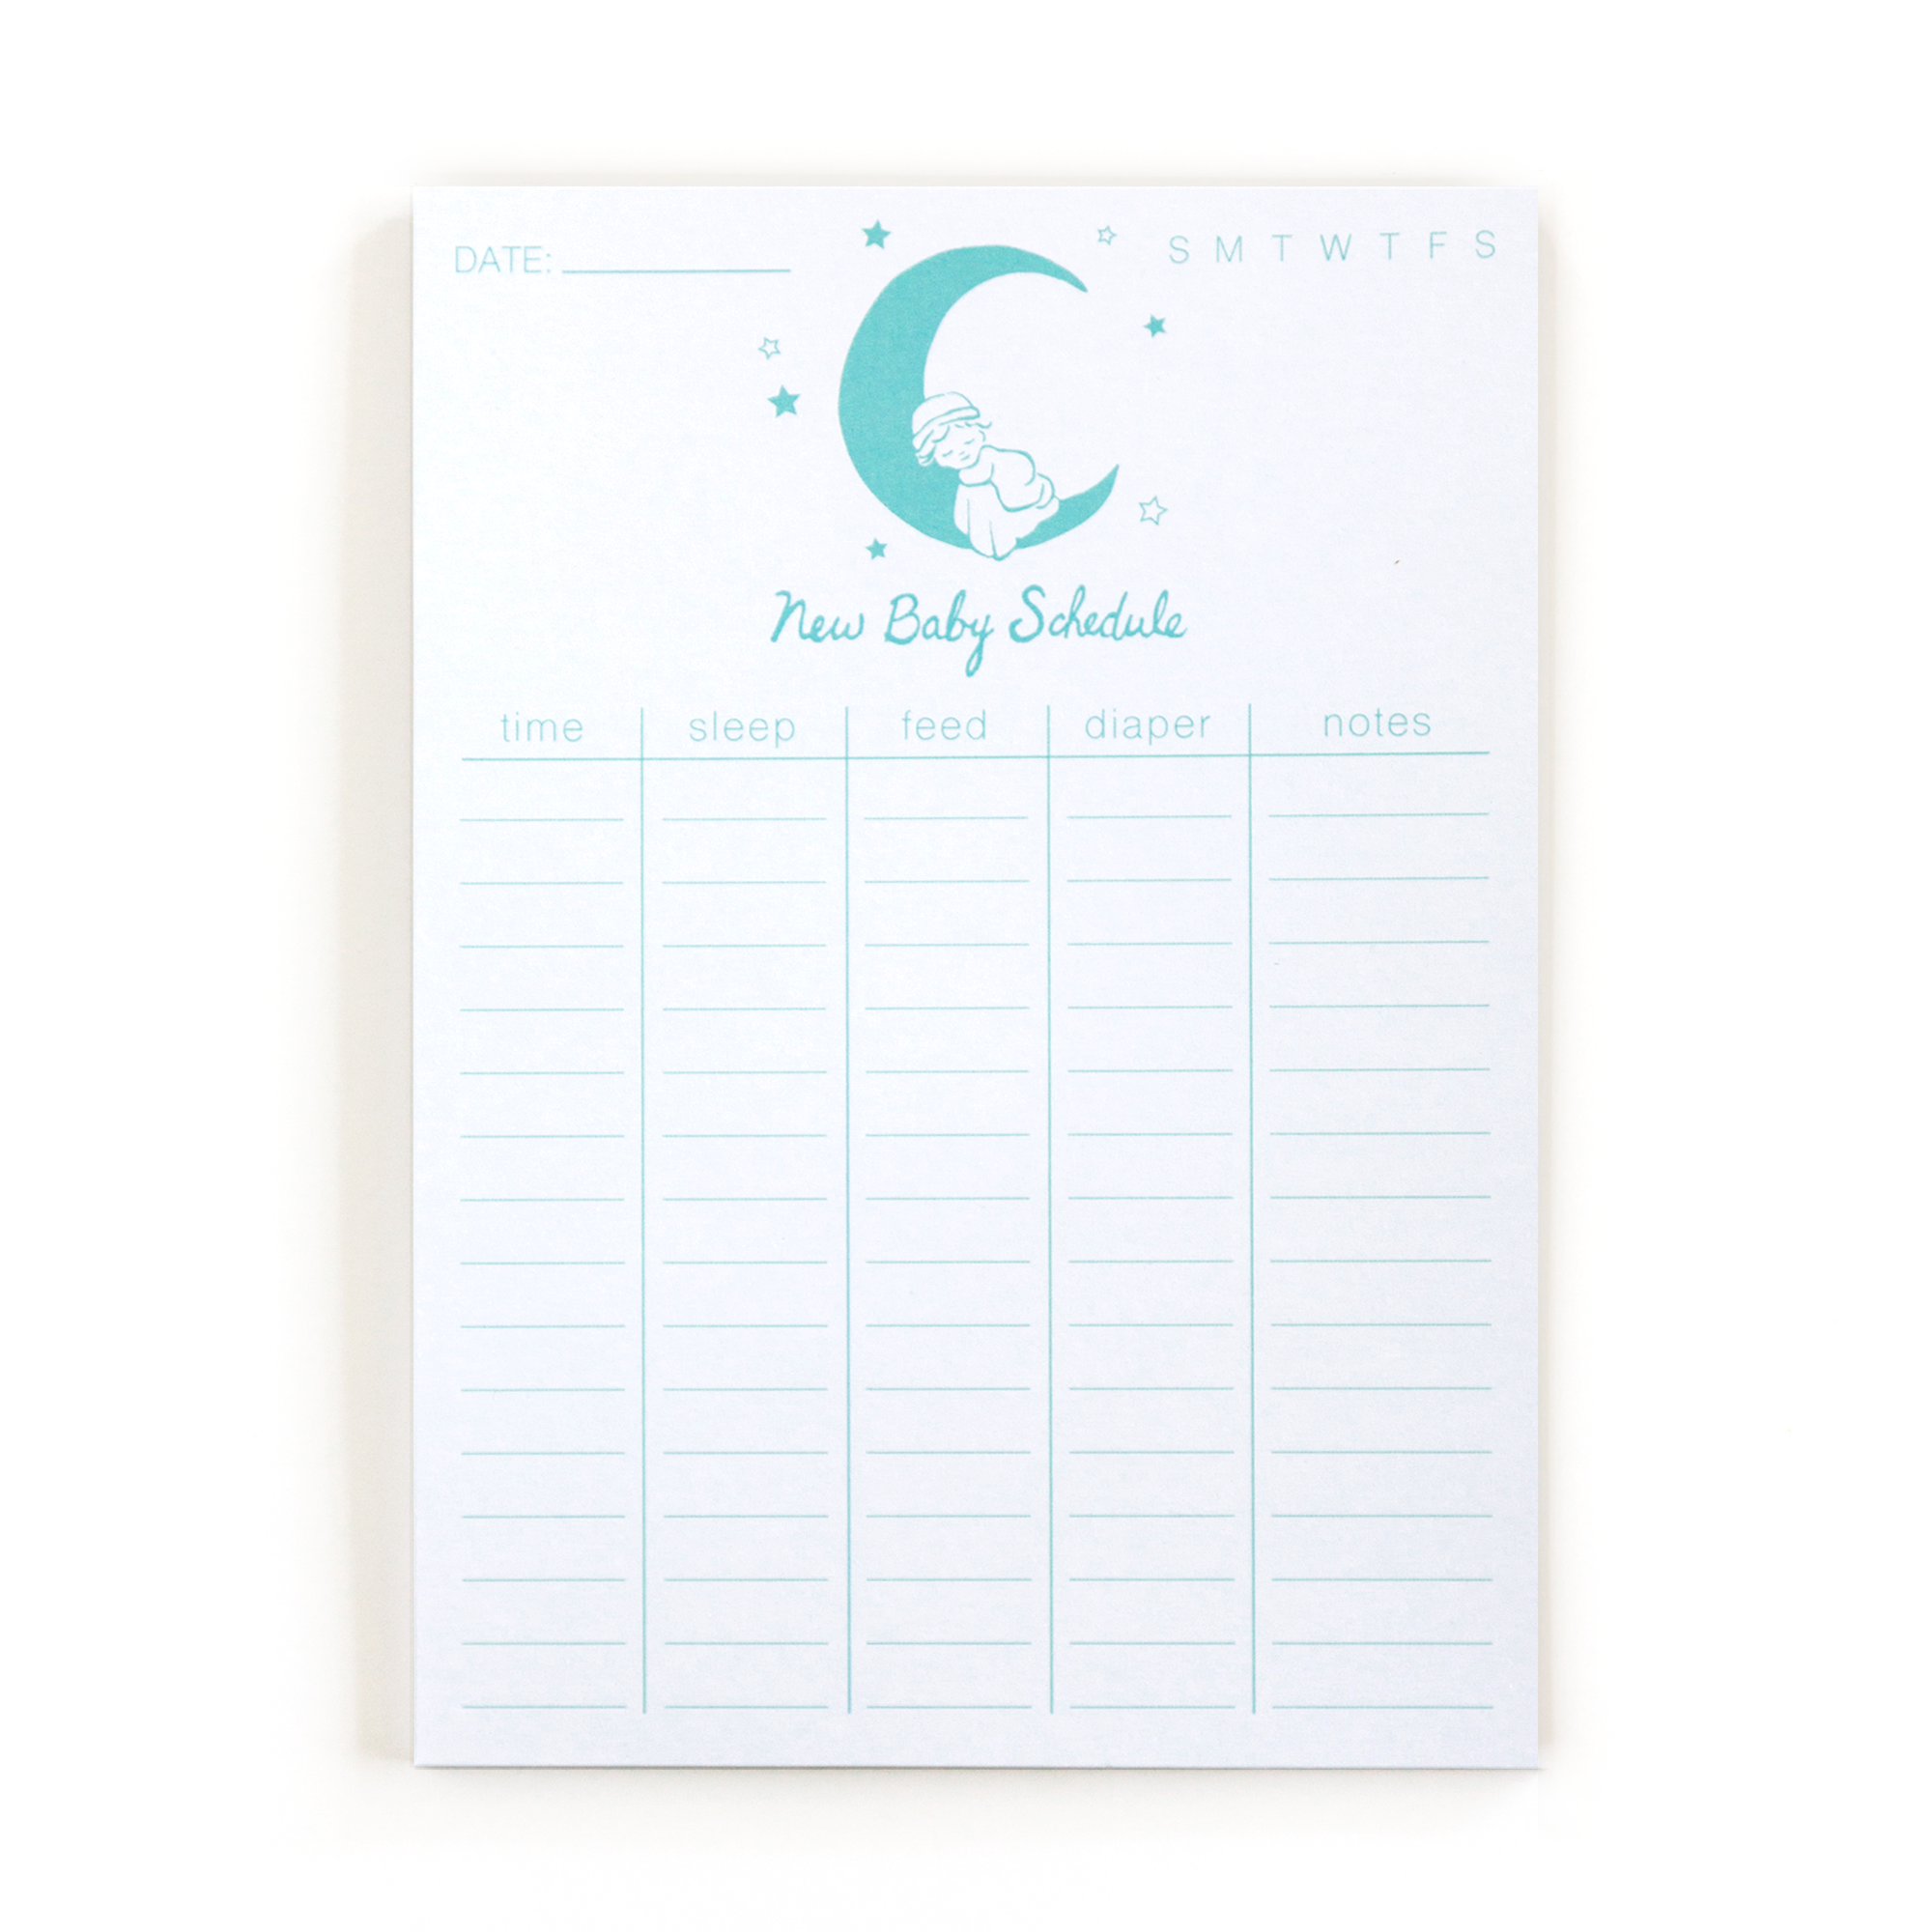 New Baby Schedule notepad